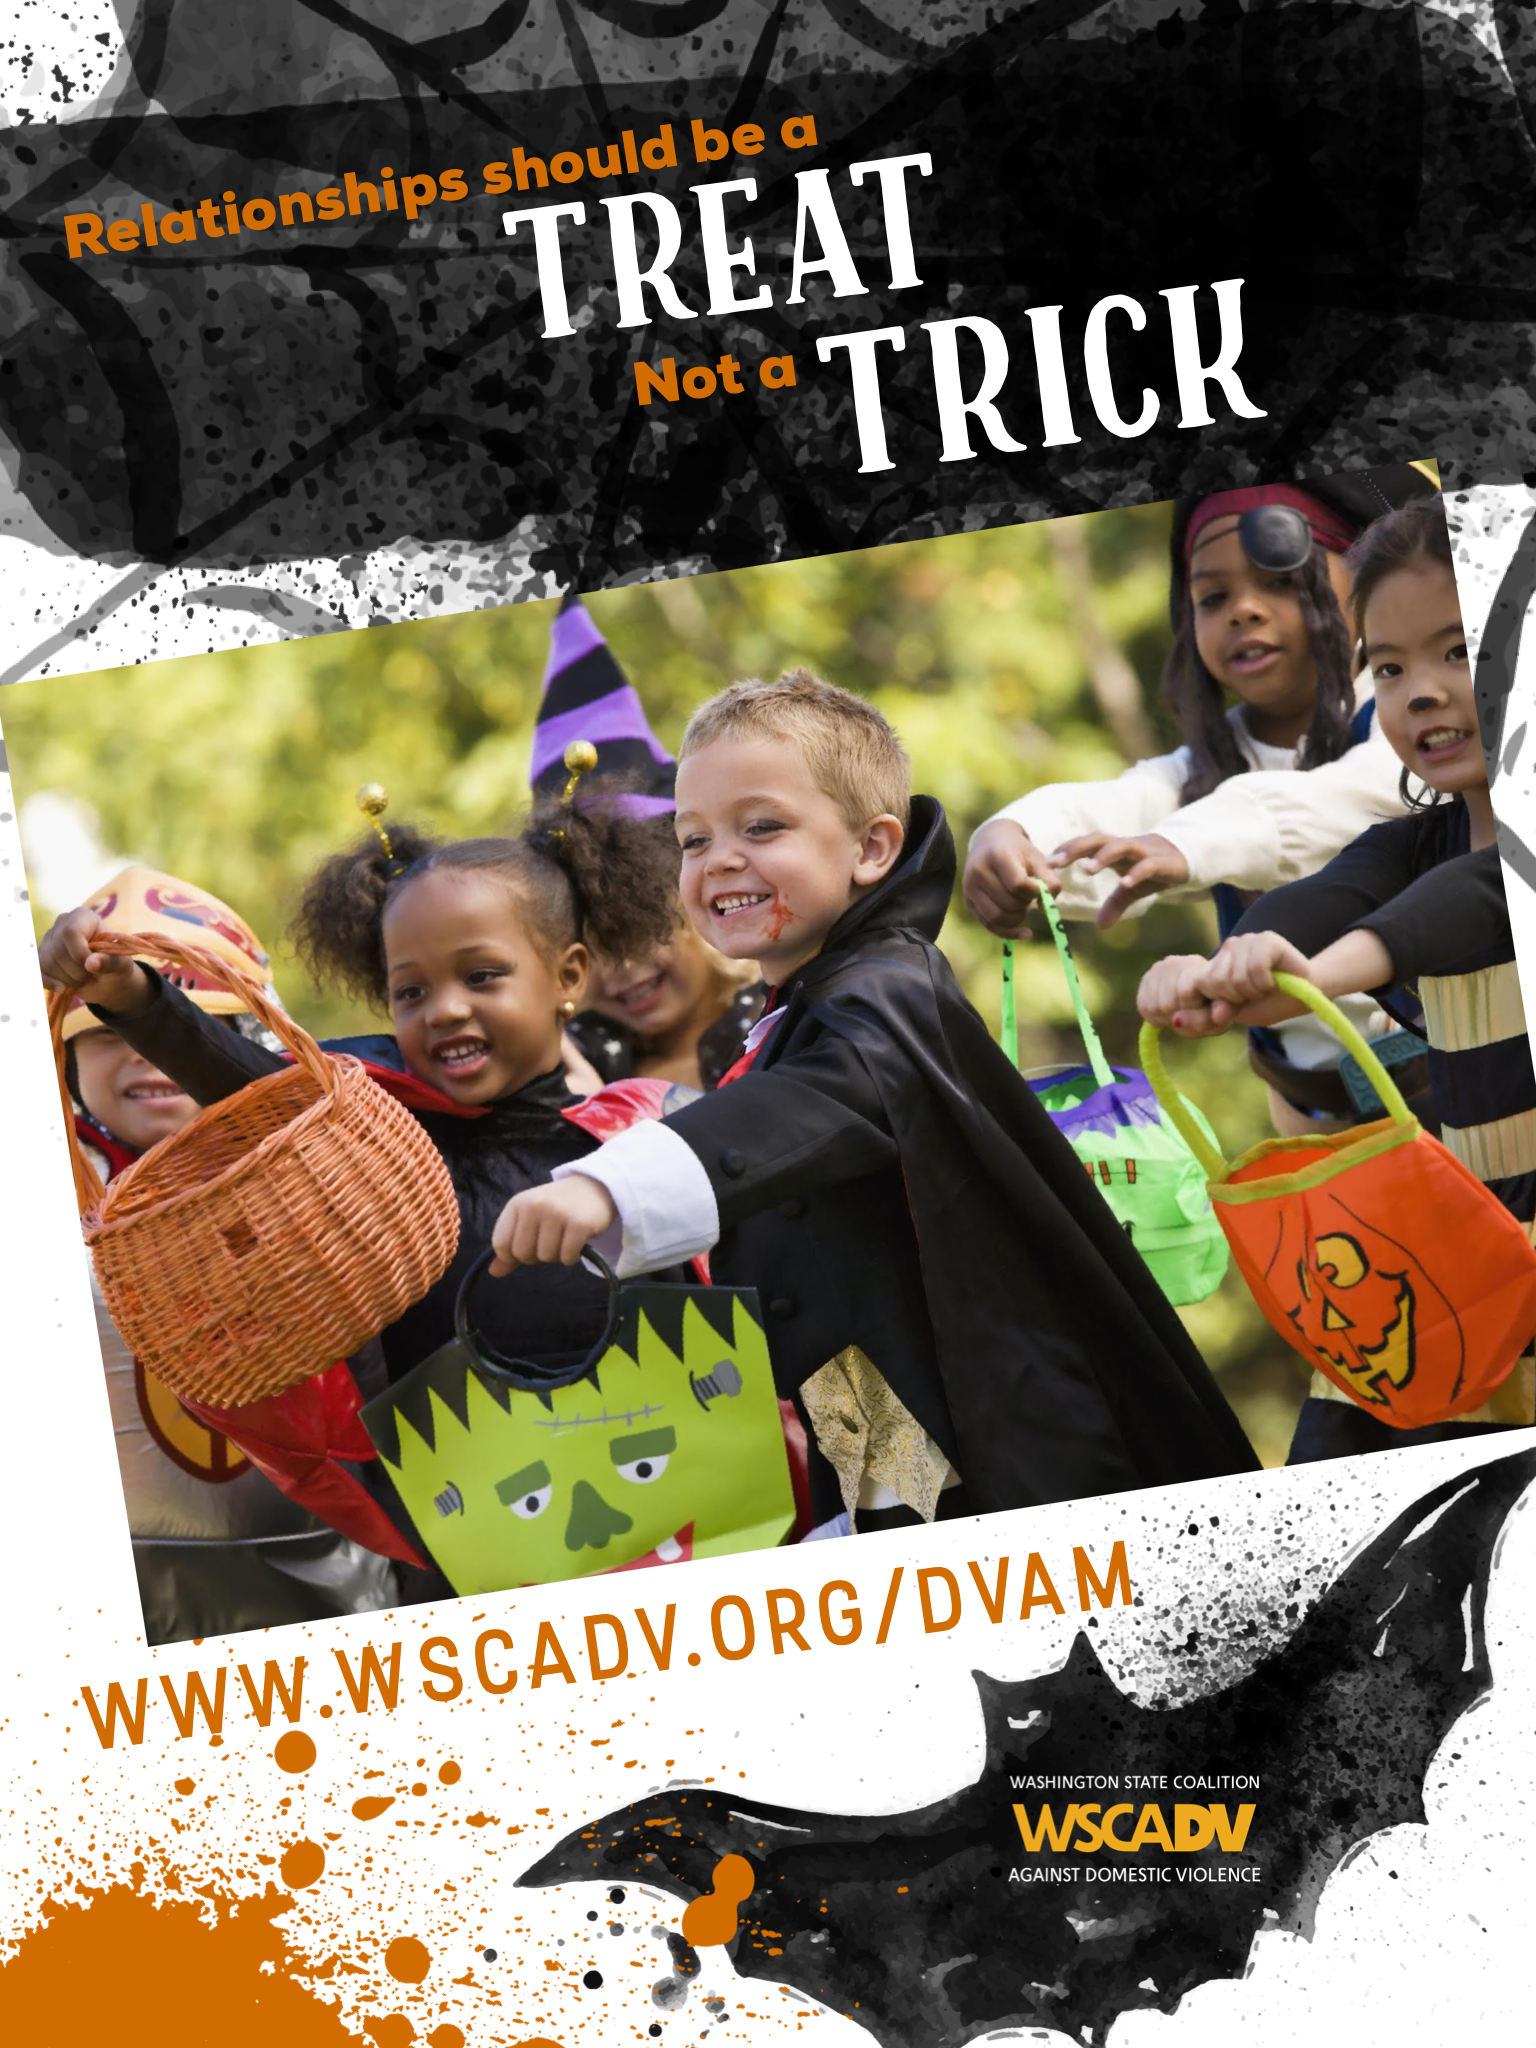 Halloween themed image for Domestic Violence Action Month. There is a photo of a group of children in halloween costumes smiling as they trick or treat. Above the photo is text that reads: Relationships should be a treat, not a trick. Underneath the photo is a bat and the url www.wscadv.org/dvam